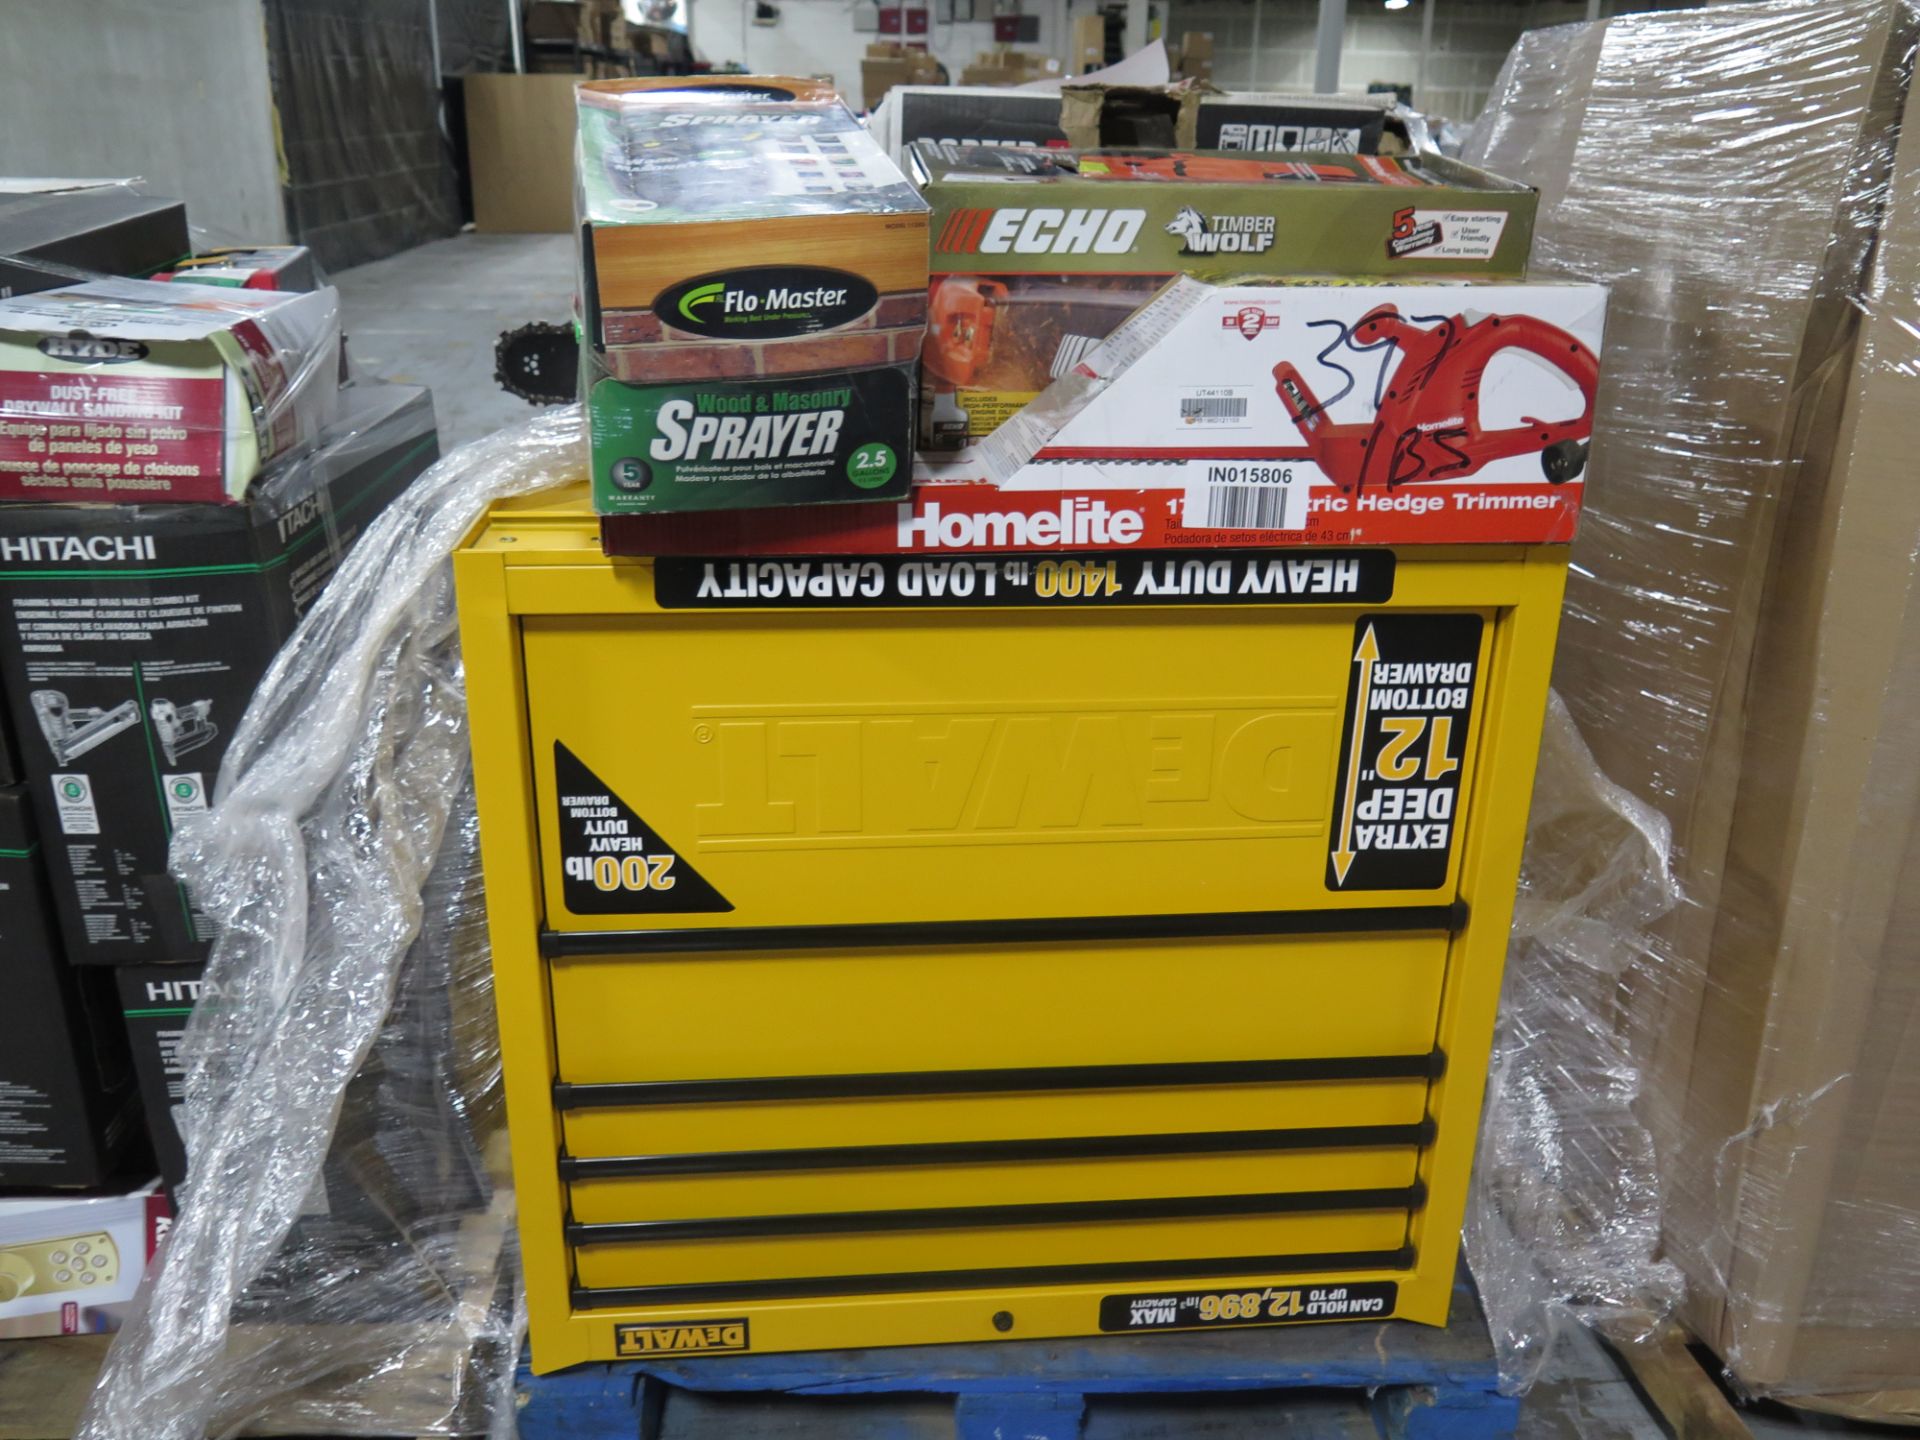 Lot of Tools Cabinets,Electric Trimmer,Chainsaw, Garden Dump Cart & Portable Air Compressor with $ - Image 5 of 5